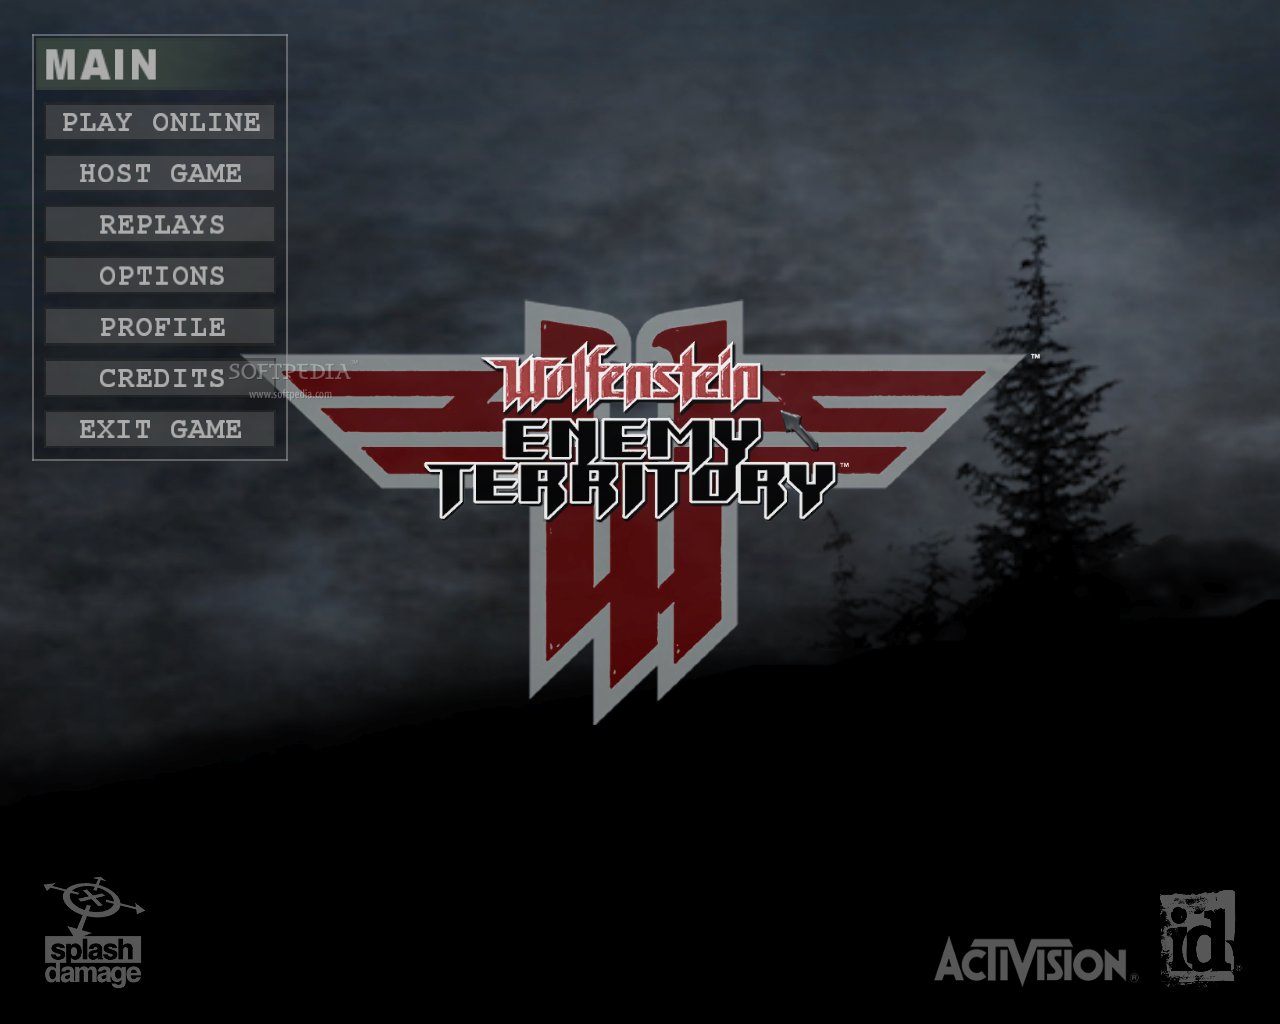 wolfenstein enemy territory name text disappears